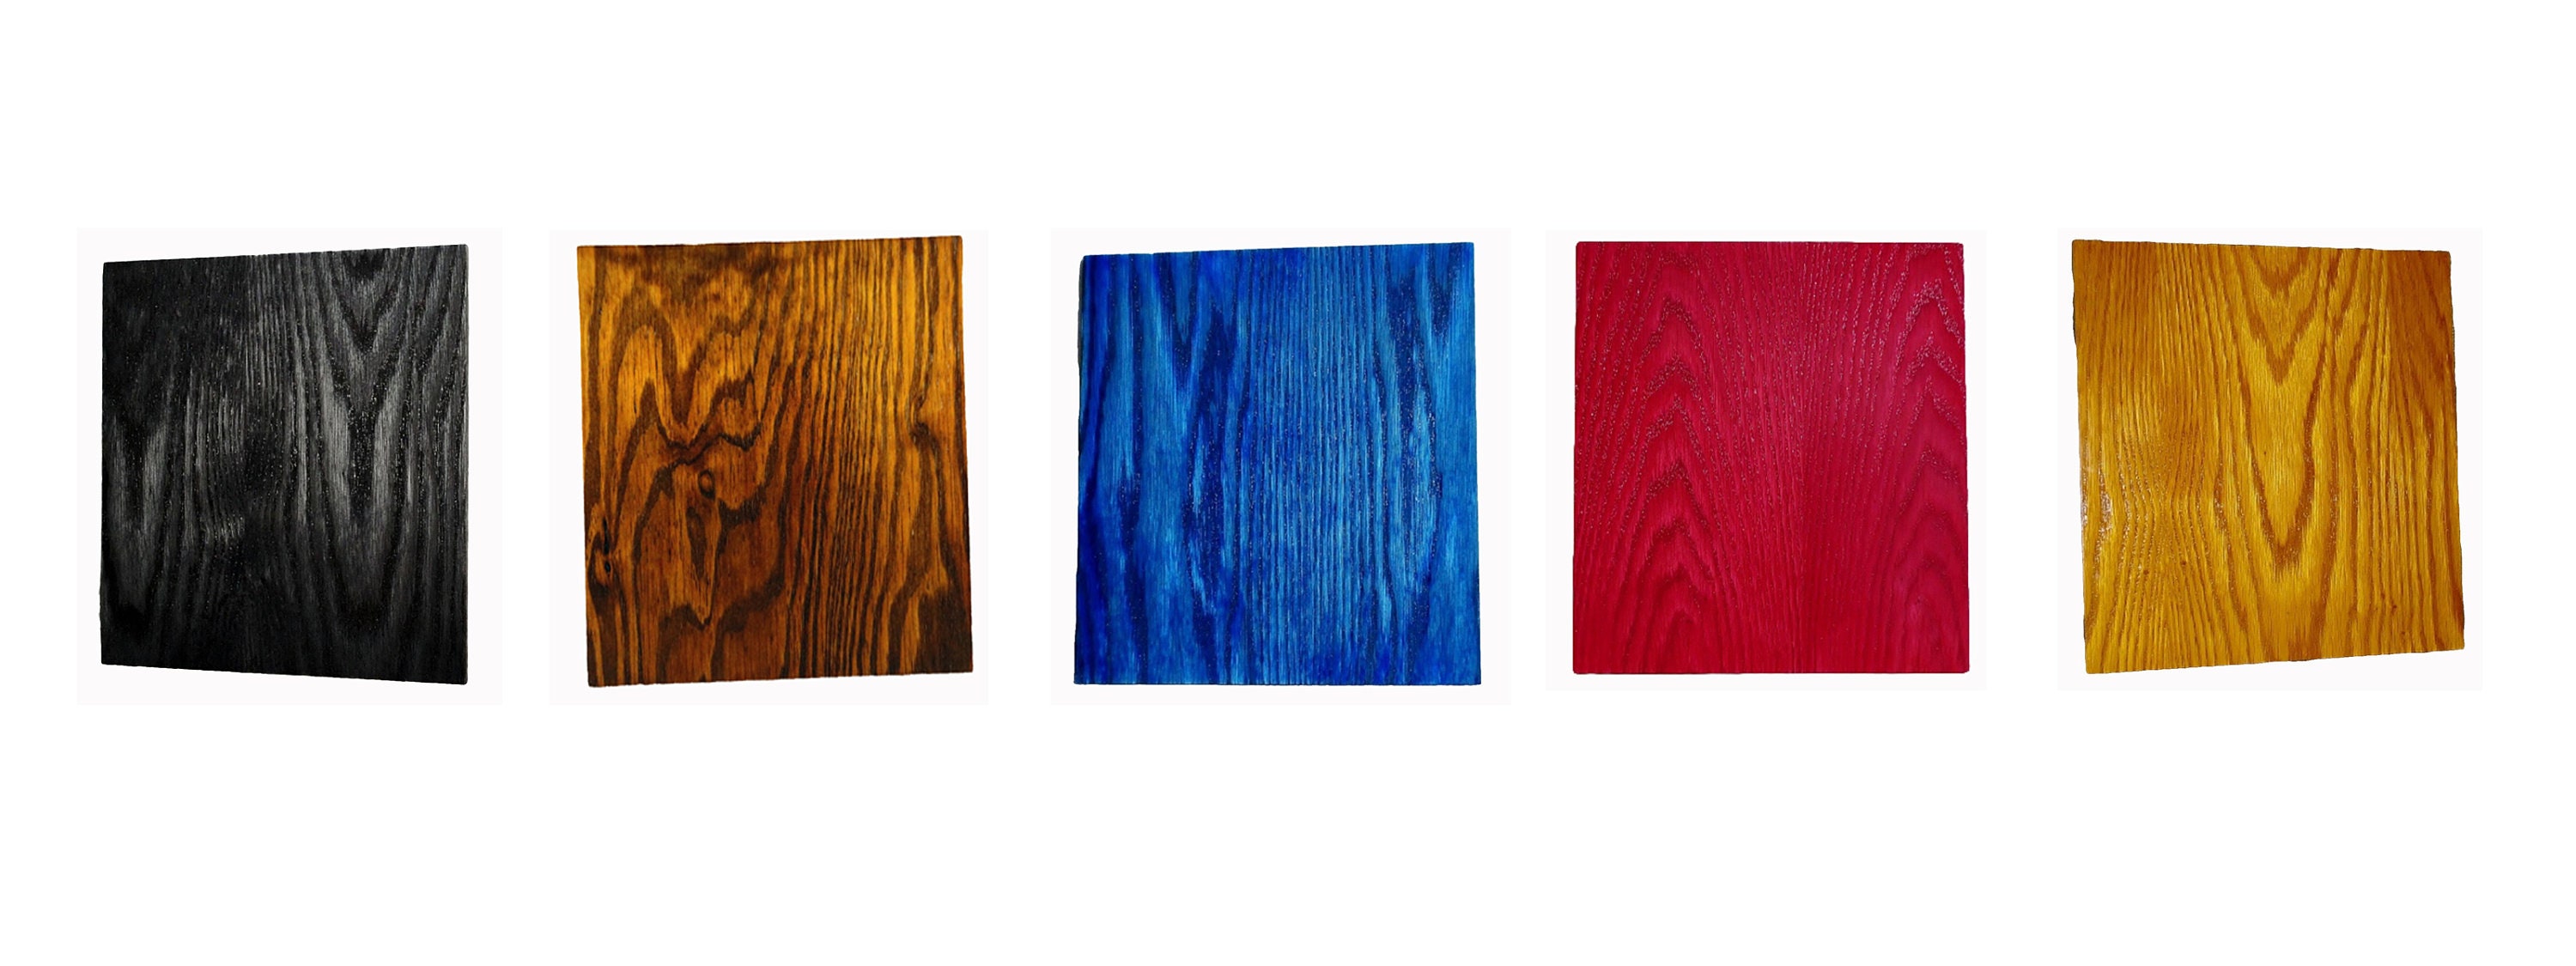 How to use Keda Wood Dye to Give Wood a Vibrant Custom Color Finish